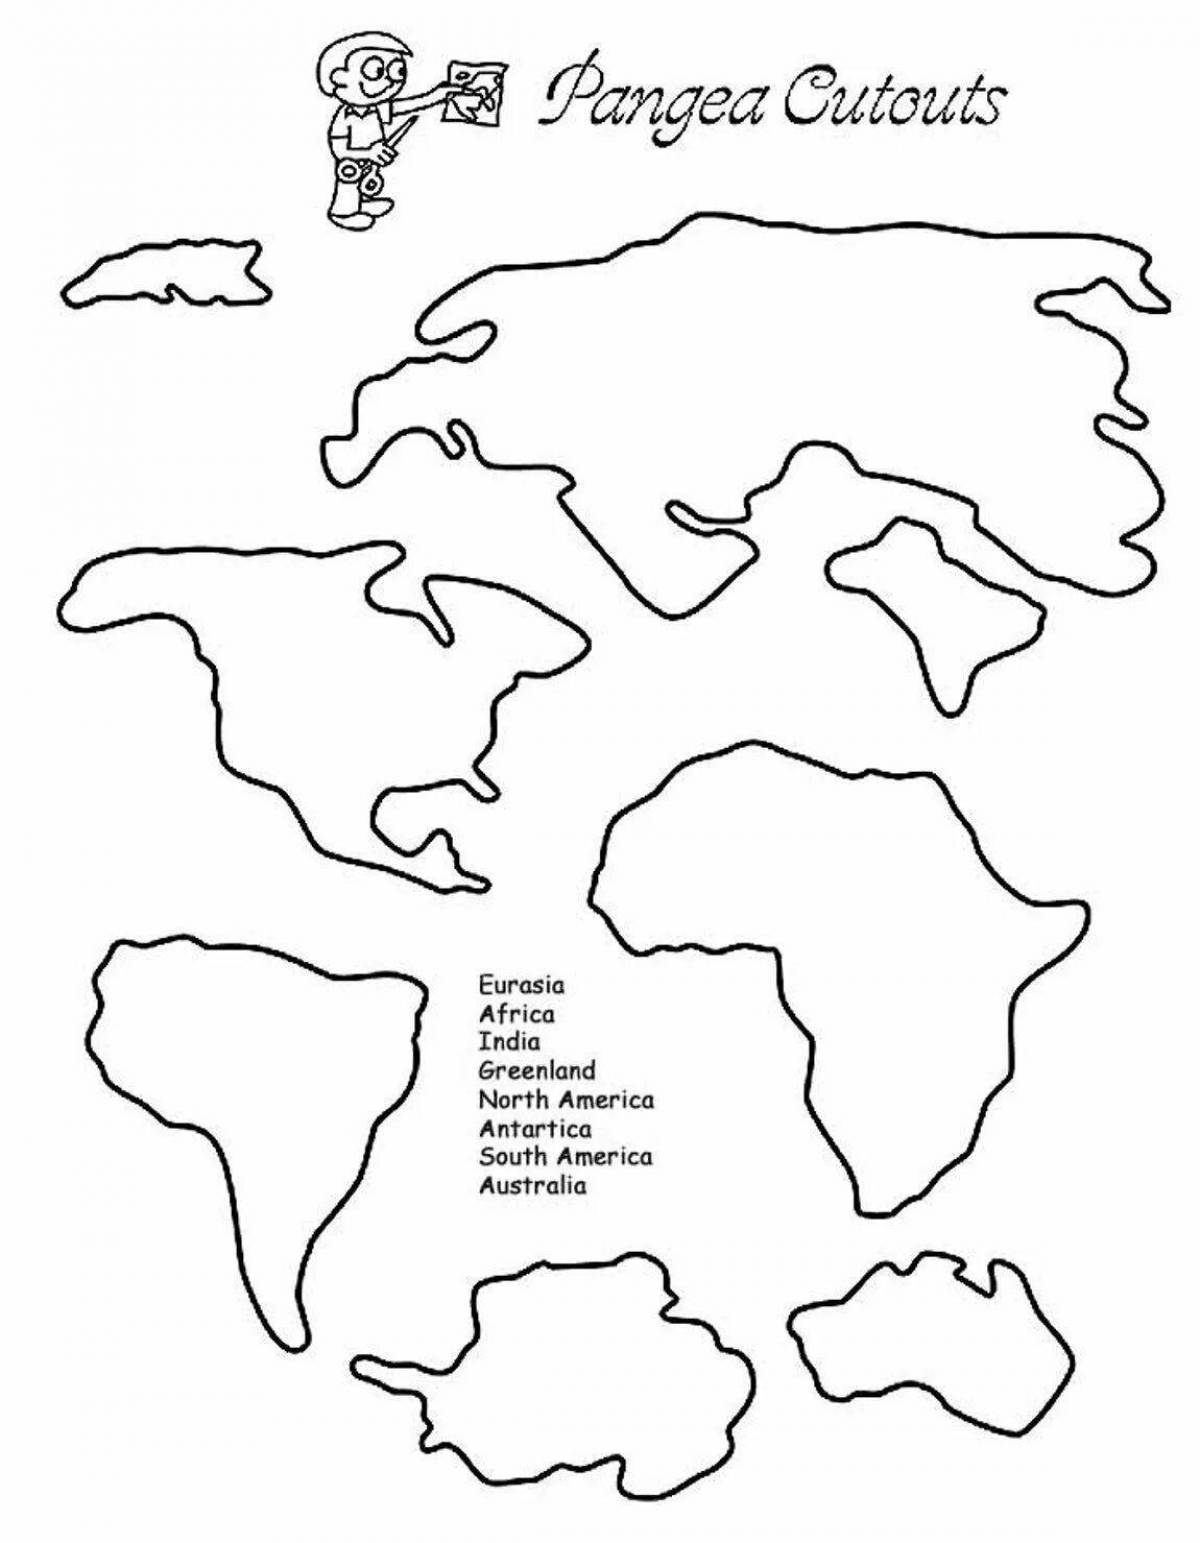 Continents of the earth for children #24